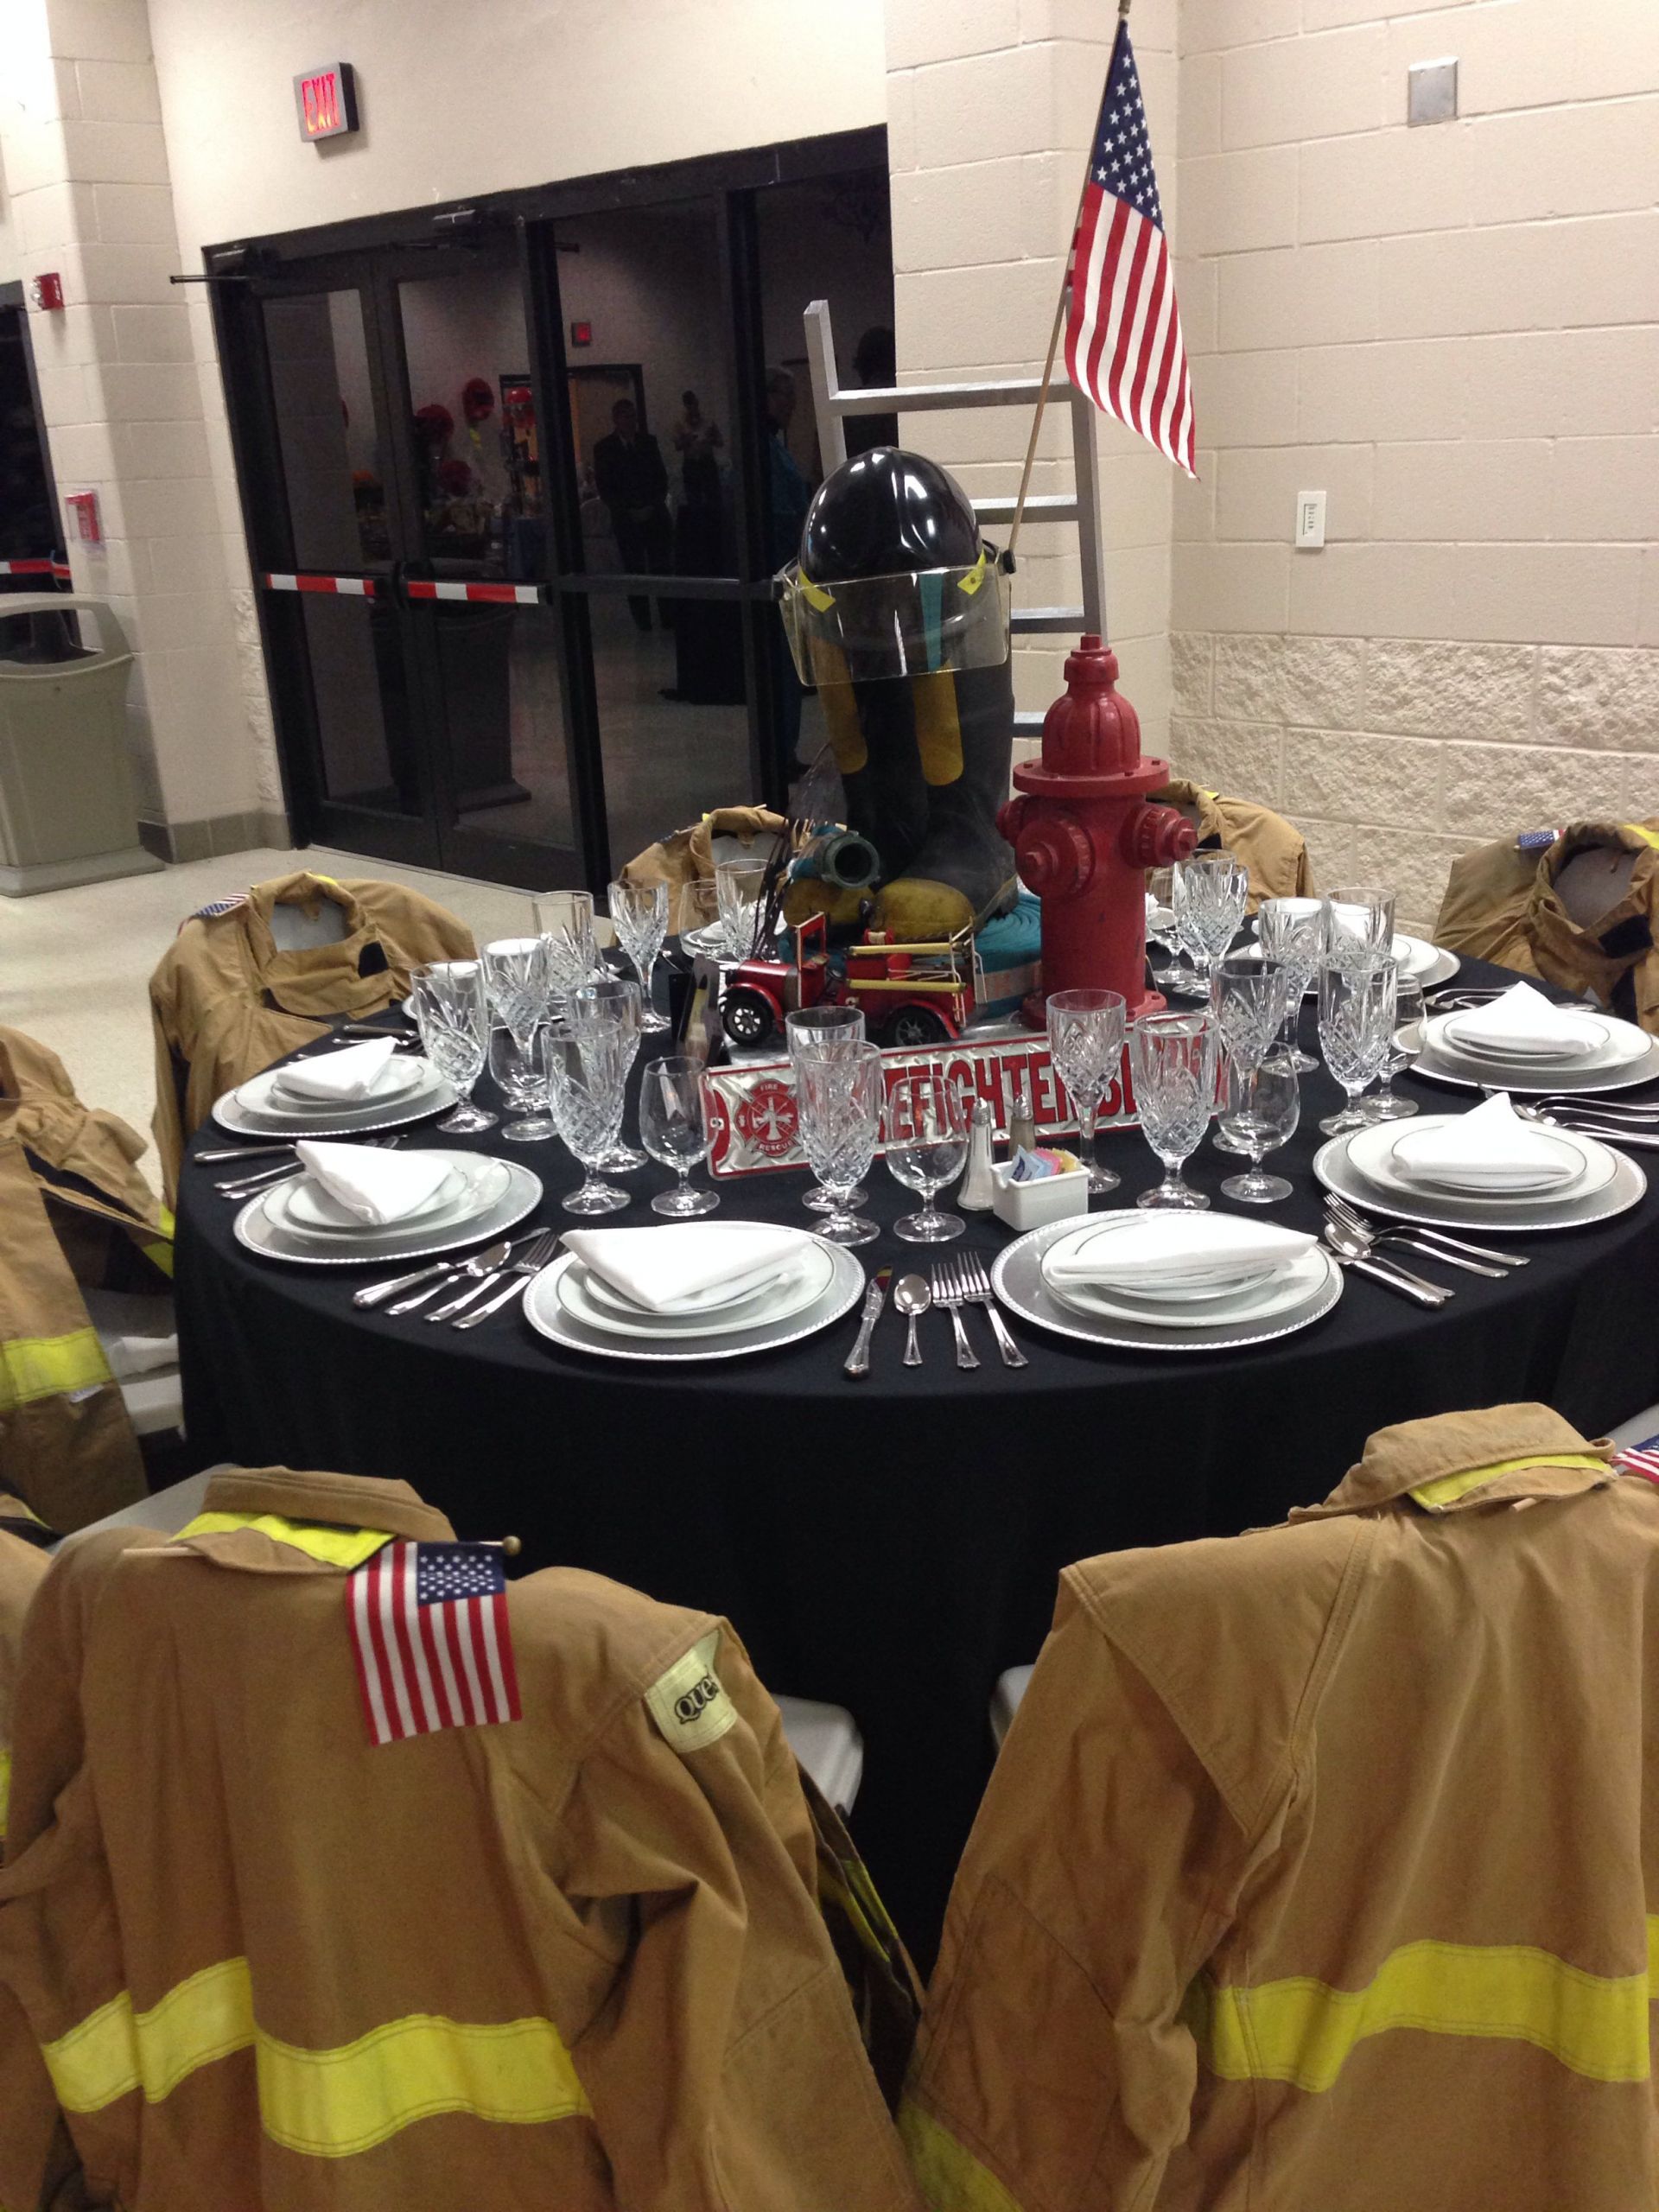 Fireman Retirement Party Ideas
 We could do something like this for the banquet next year